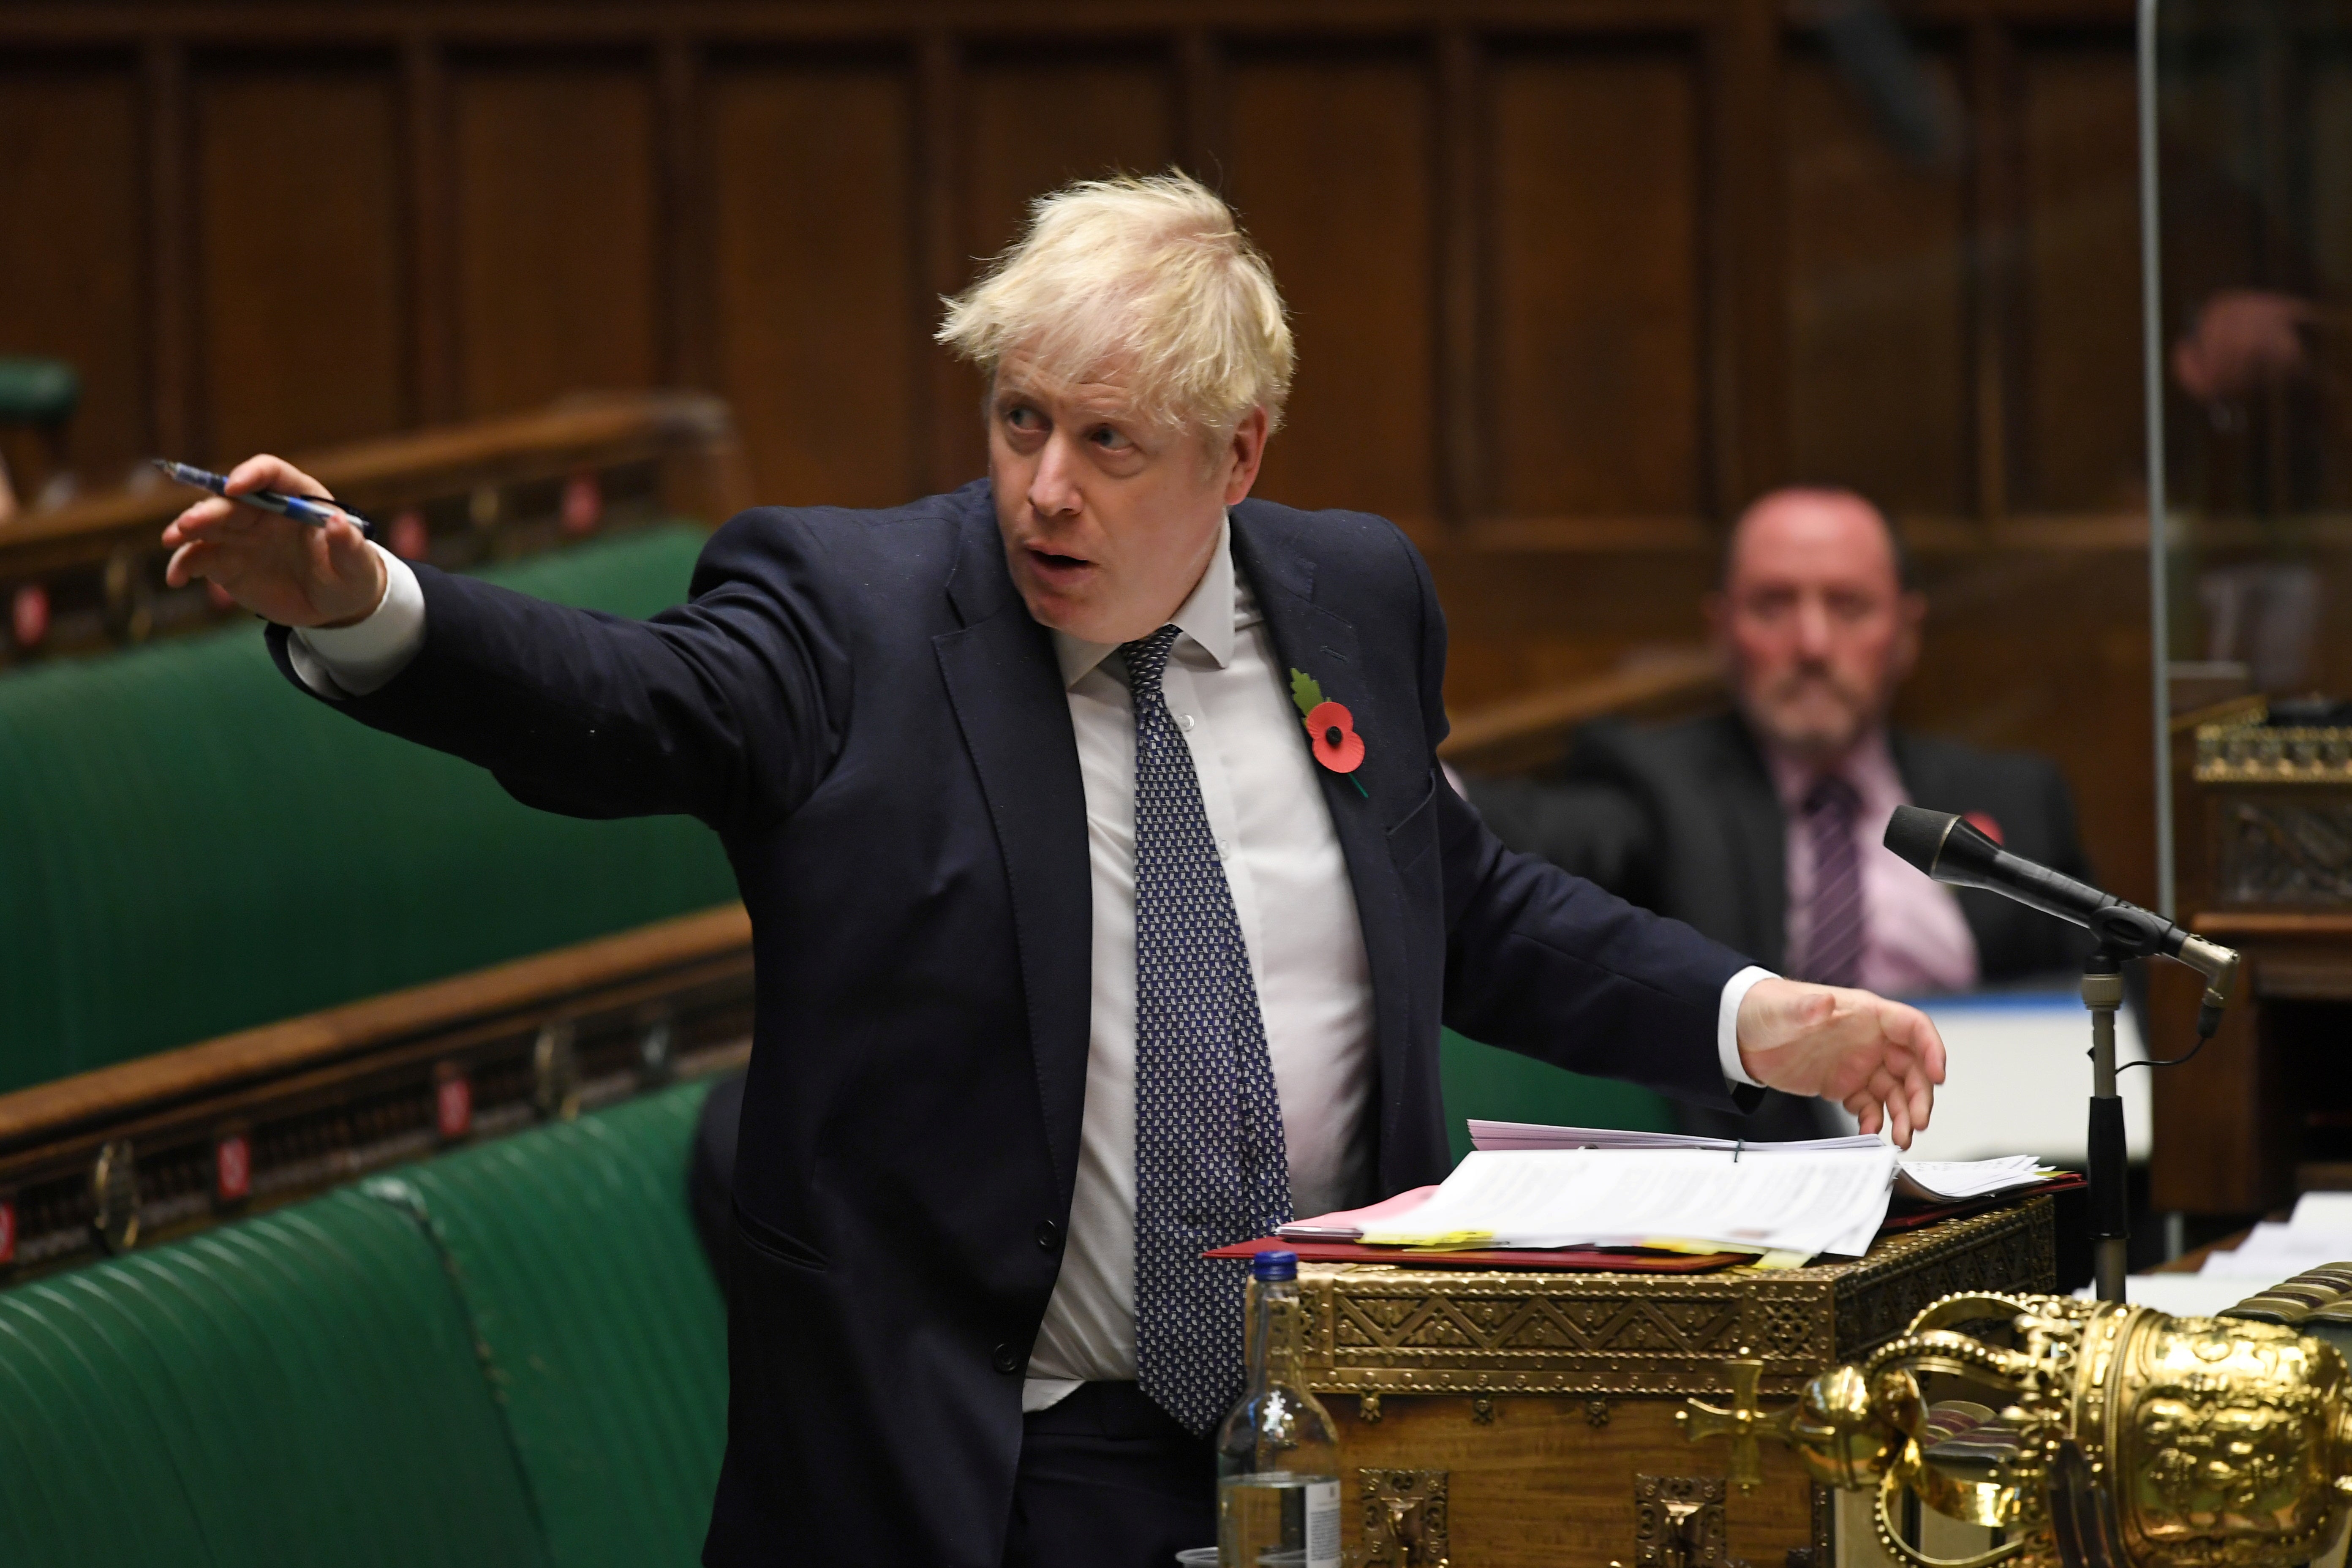 The new group could potentially force Boris Johnson into embarrassment of relying on Labour votes